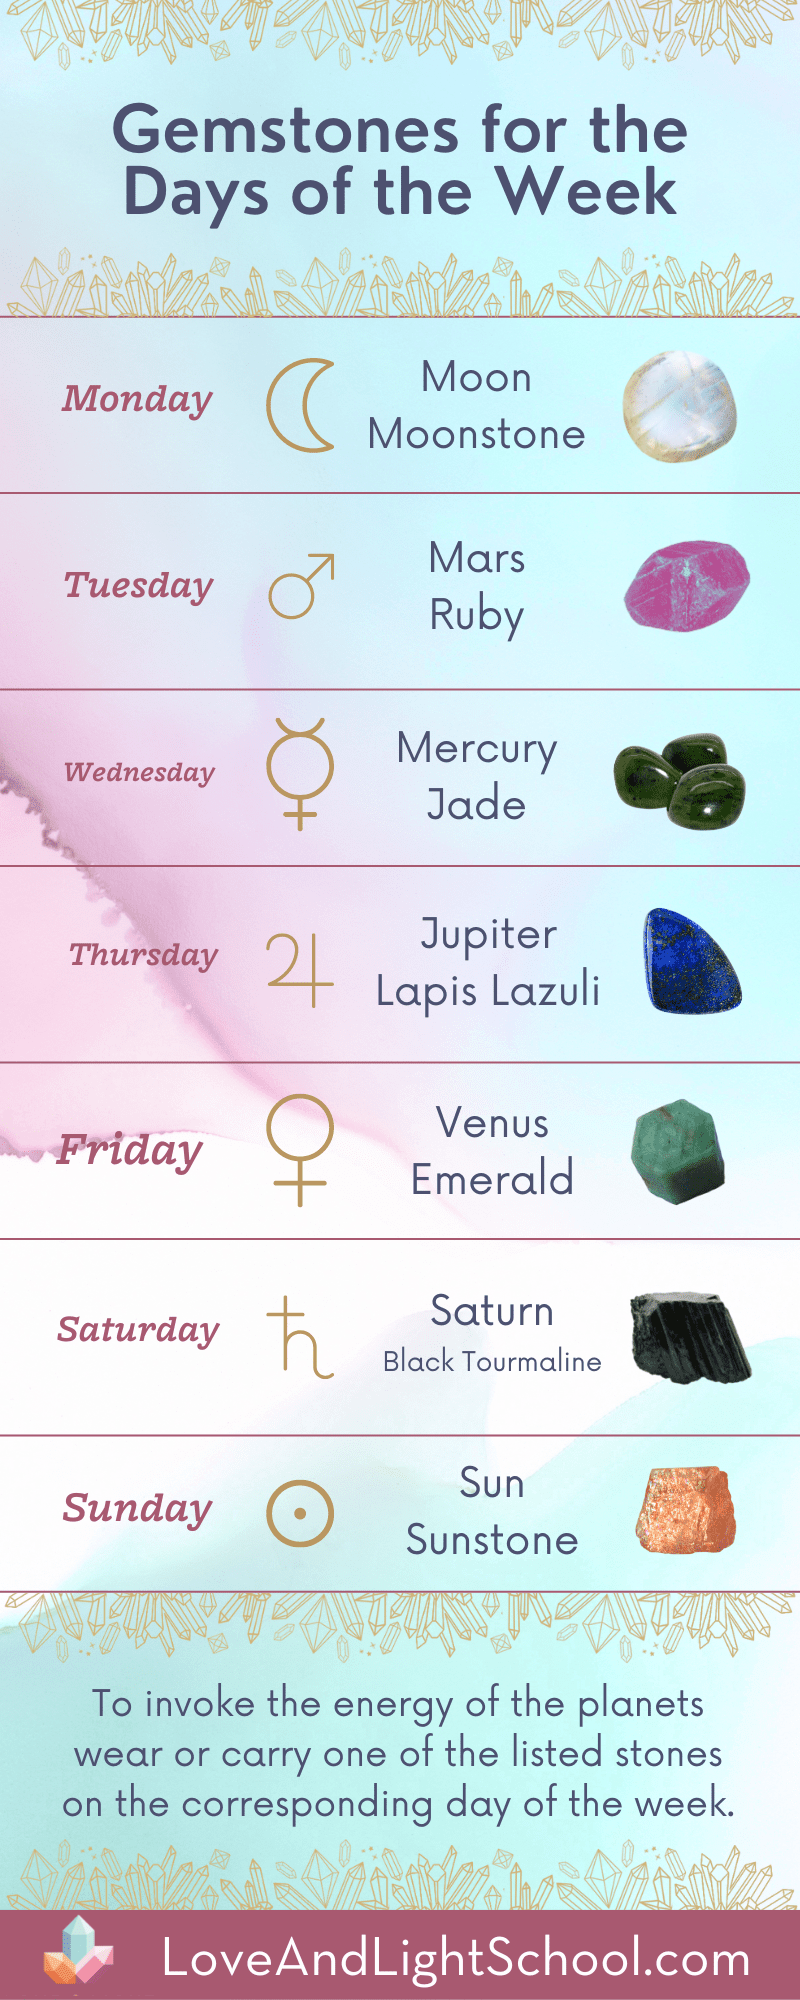 Gemstones & Planets for the Days of the Week Infographic